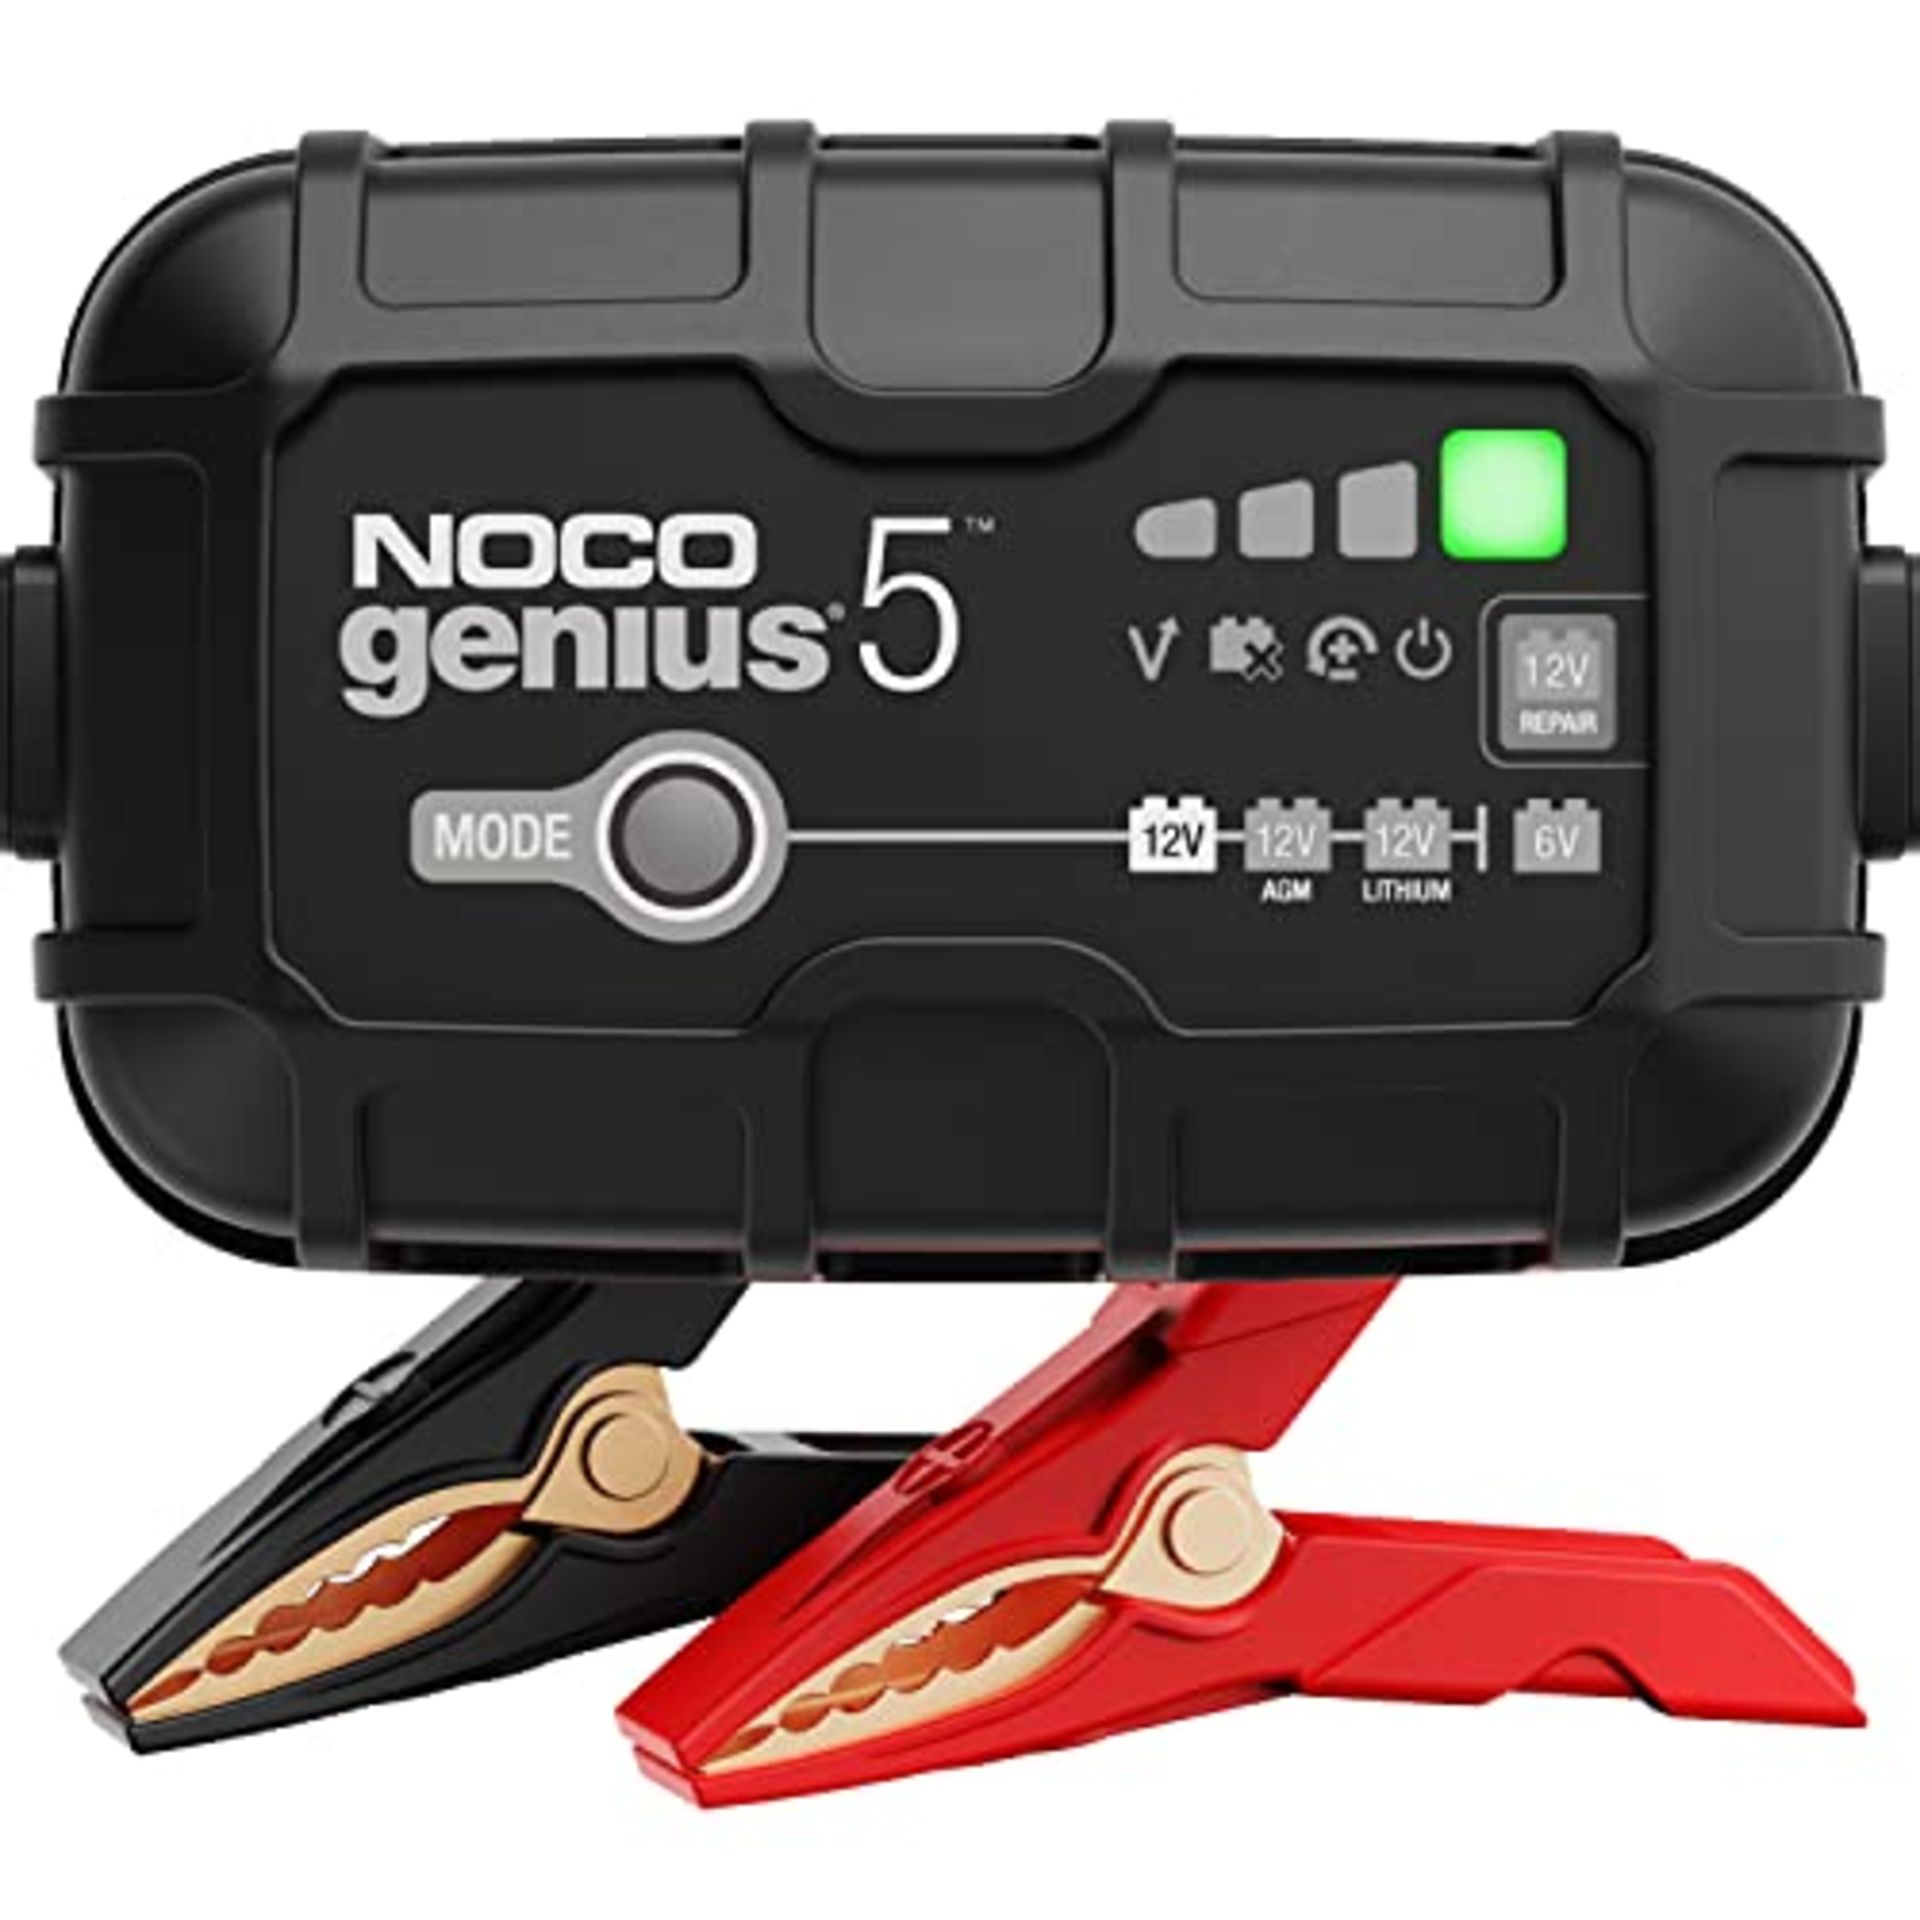 RRP £79.00 NOCO GENIUS5UK, 5A Car Battery Charger, 6V and 12V Portable Smart Charger, Battery Mai - Image 9 of 10